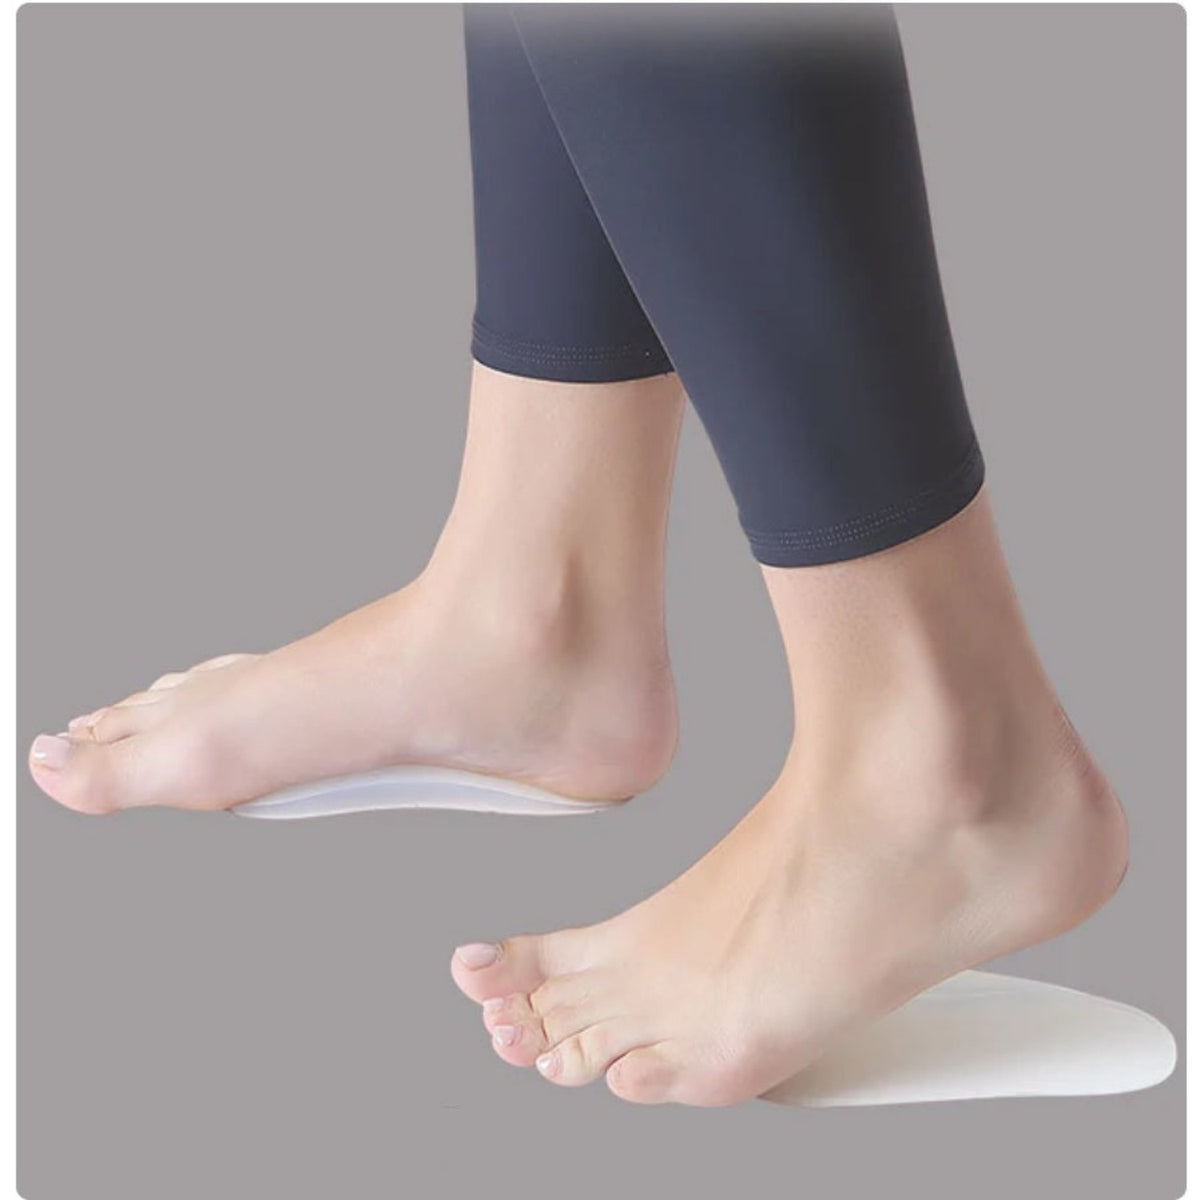 Flamingo Health Orthopaedic Medial Arch Support Universal Code 2093